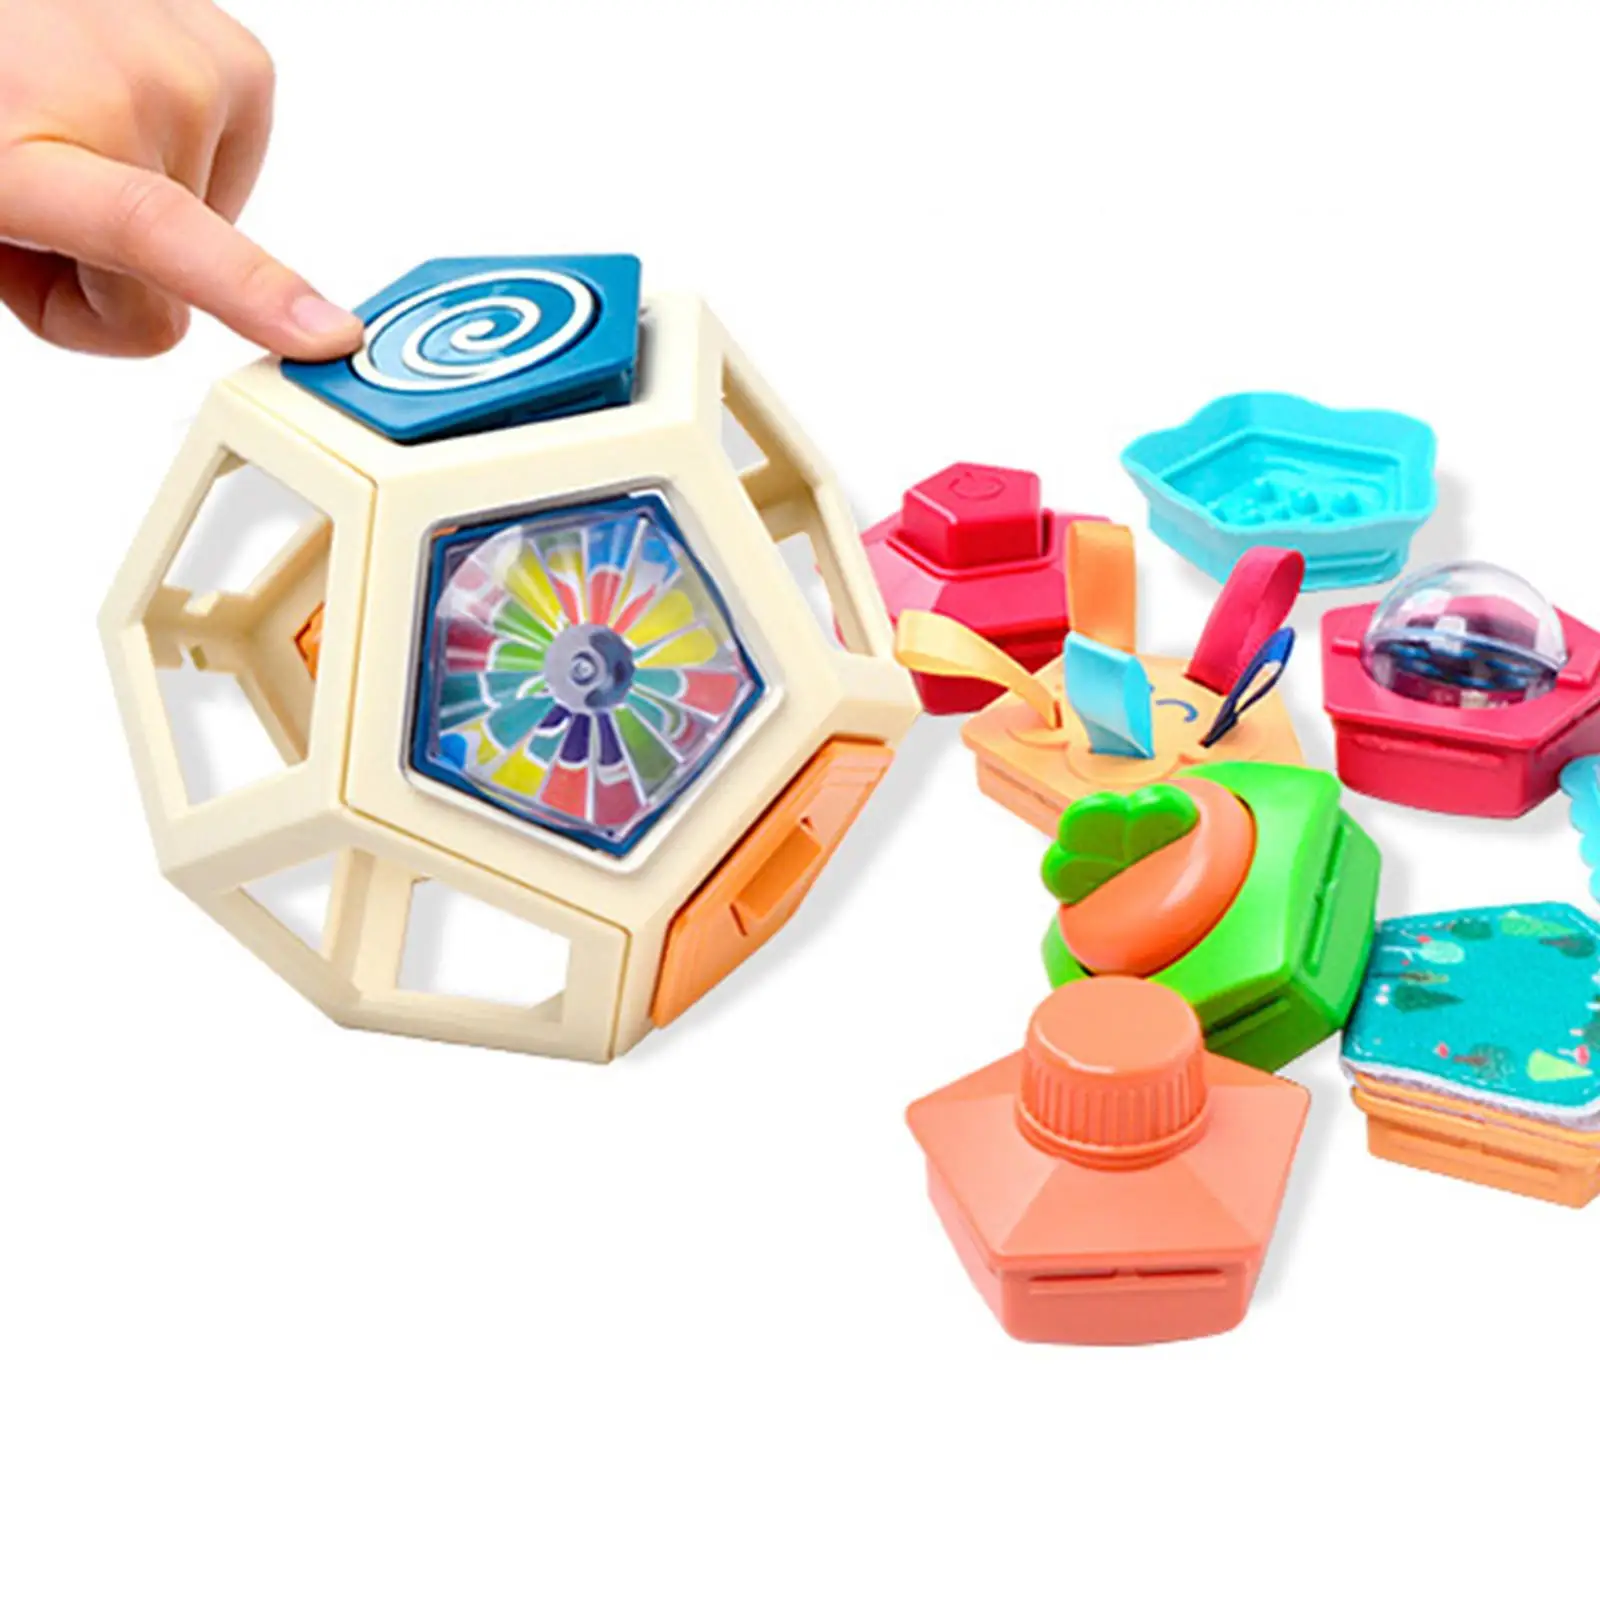 Sensory Busy Ball Early Developmental Learning Toys Puzzle Early Education Toys for Car Airplane Toy Birthday Gift Children